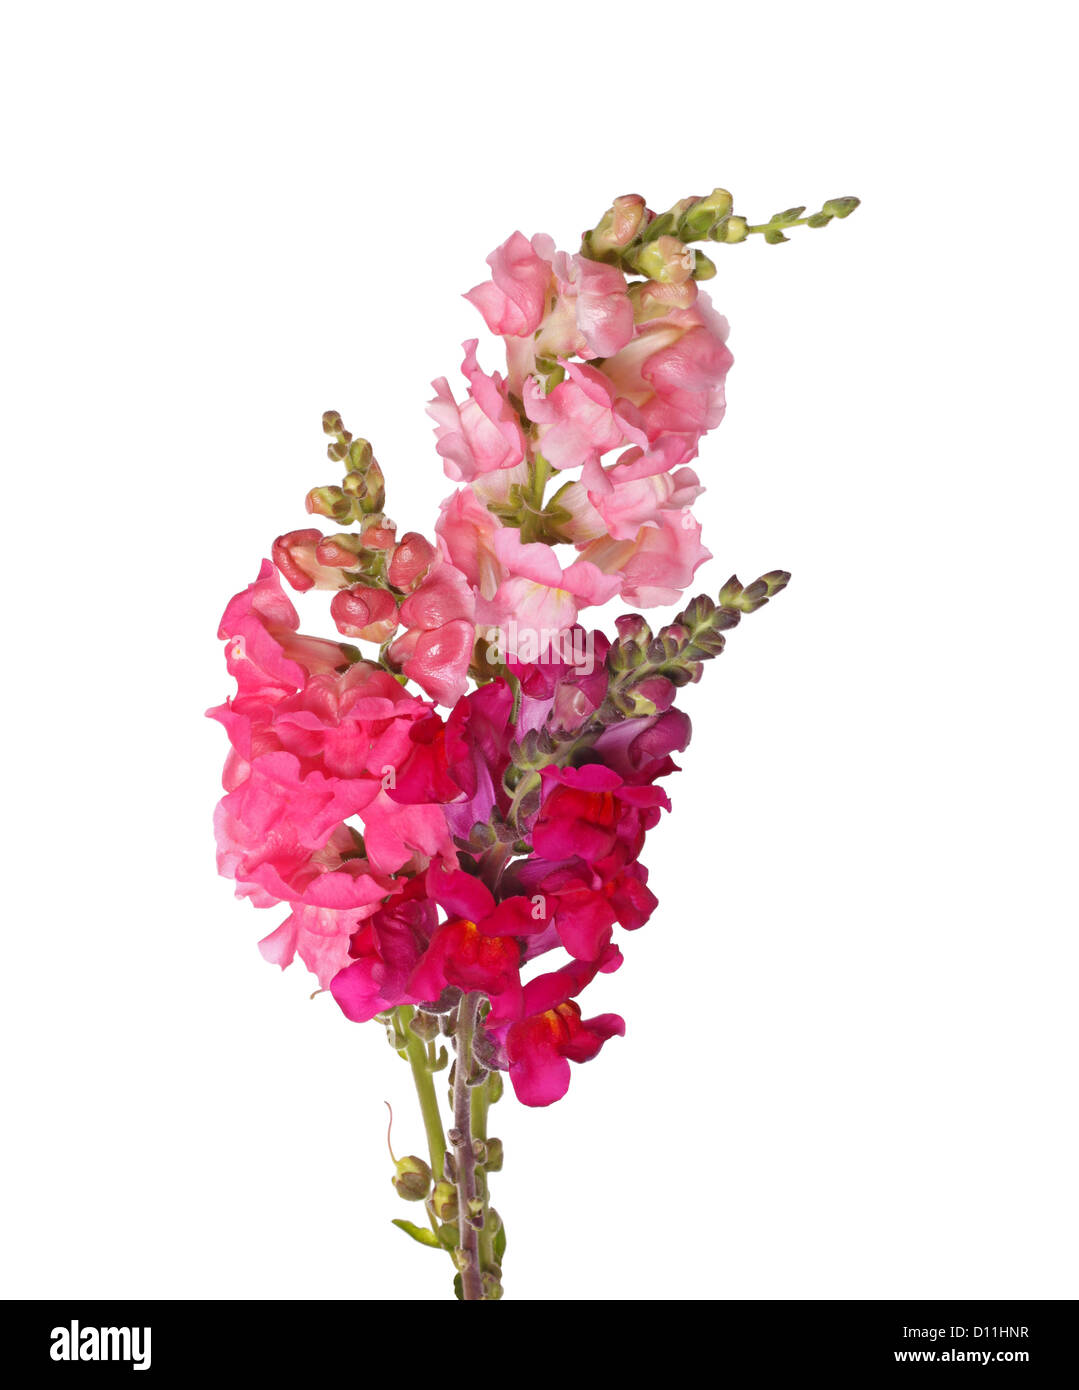 Several stems with pink, red, purple and yellow flowers of snapdragons (Antirrhinum majus) isolated against a white background Stock Photo